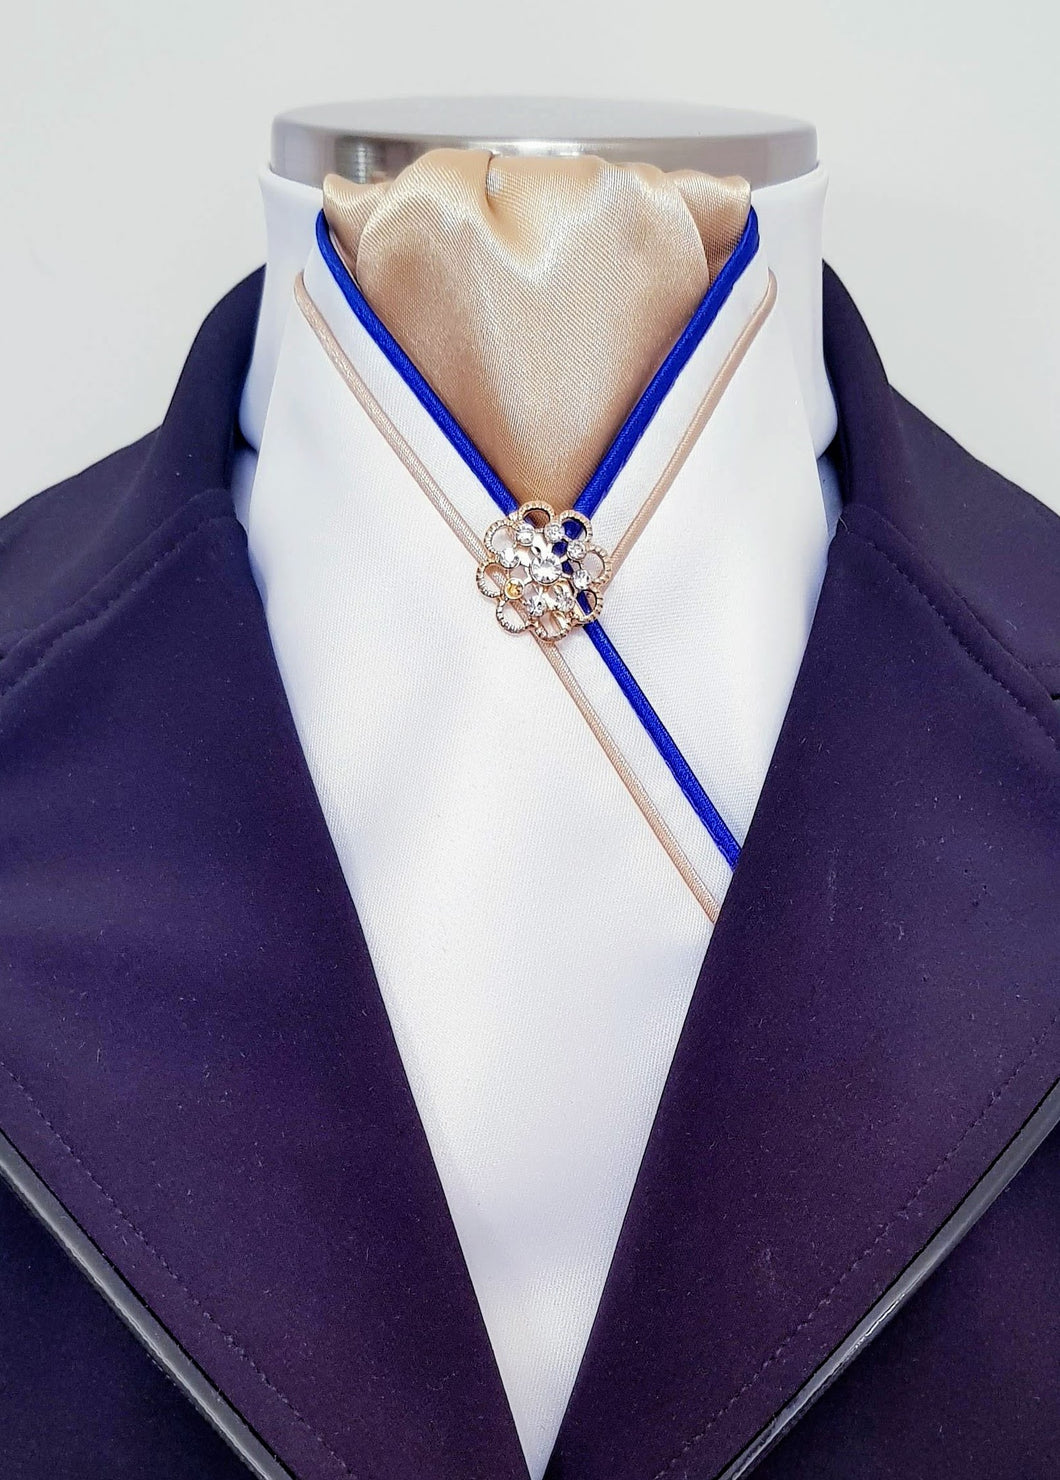 ERA MARLO STOCK TIE - White satin, gold, royal blue & gold piping and brooch